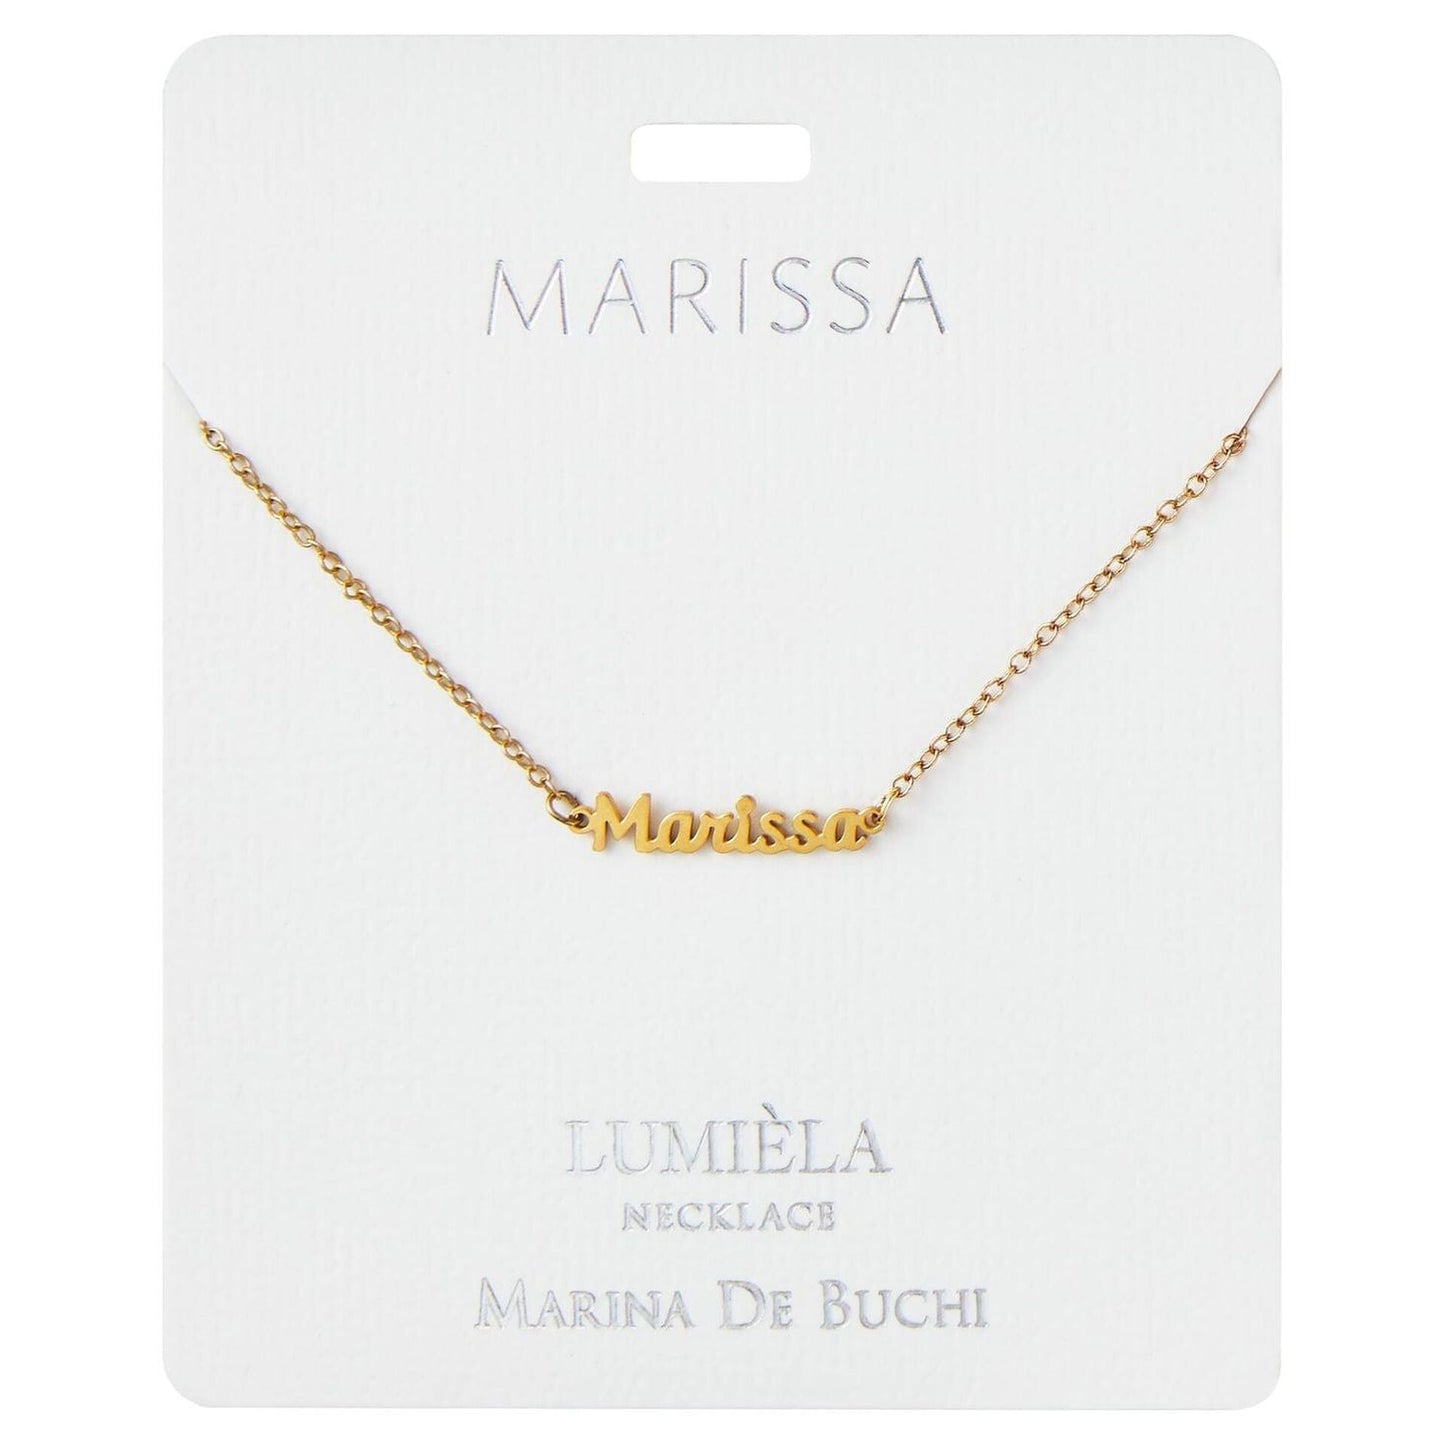 Lumiela Personalized Nameplate Cheyenne Necklace in Gold Tone